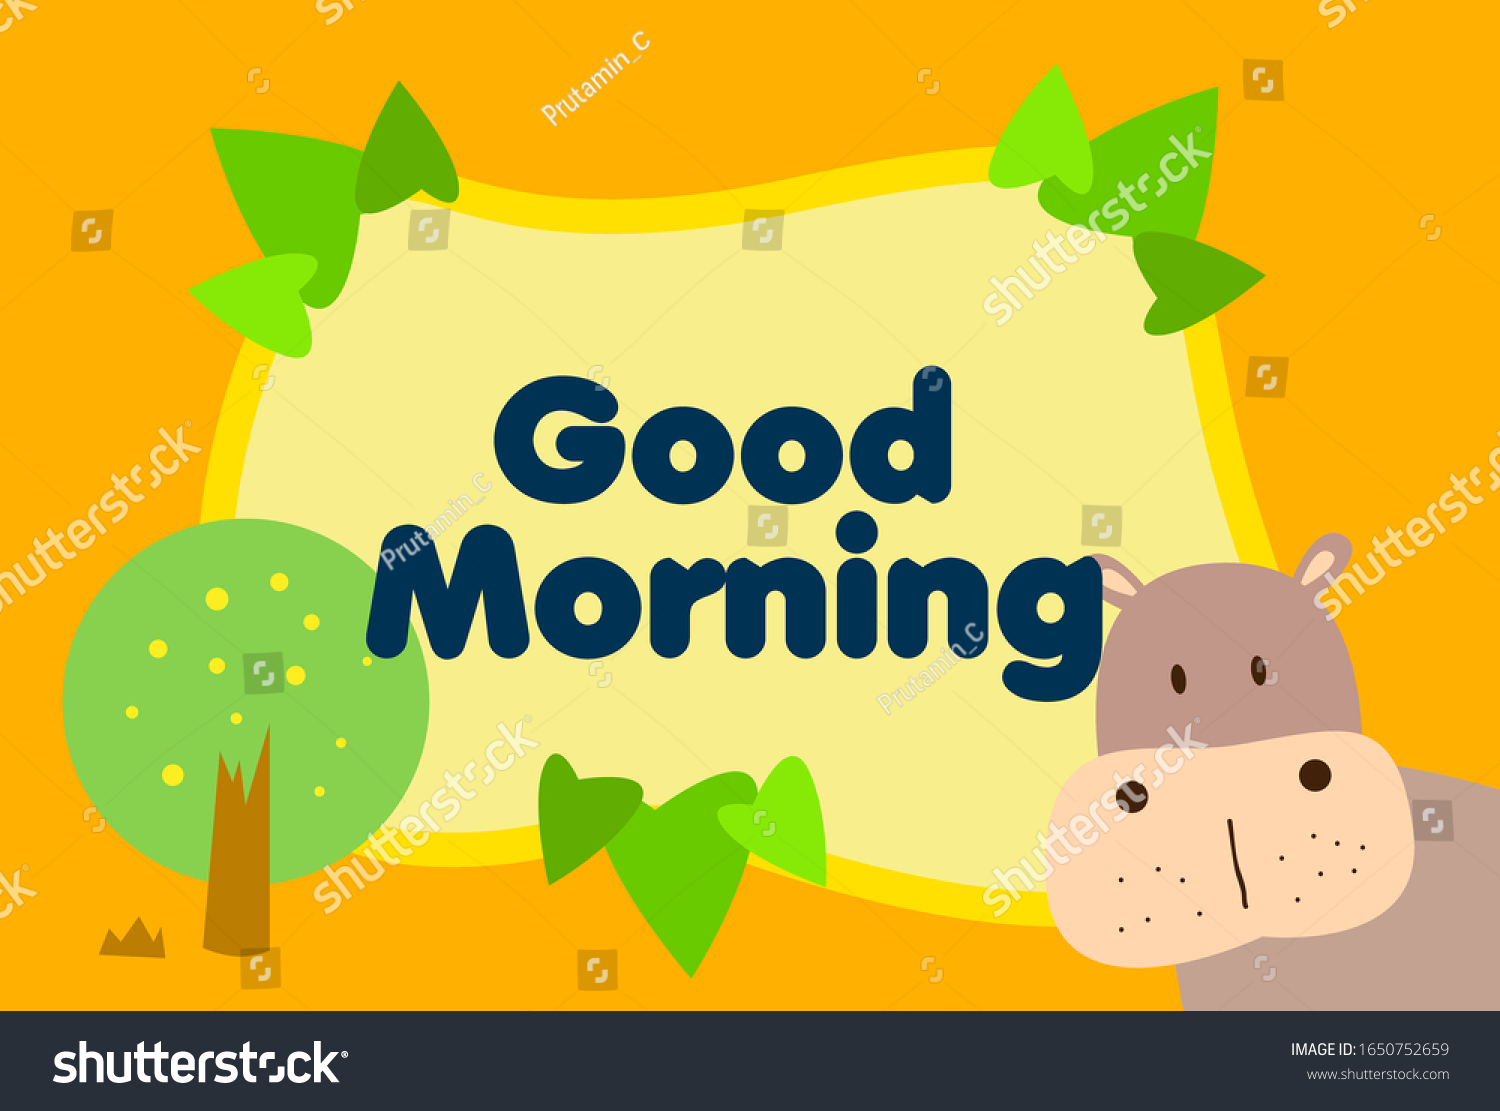 Good Morning Beautiful Greeting Card Background Stock Vector Royalty Free